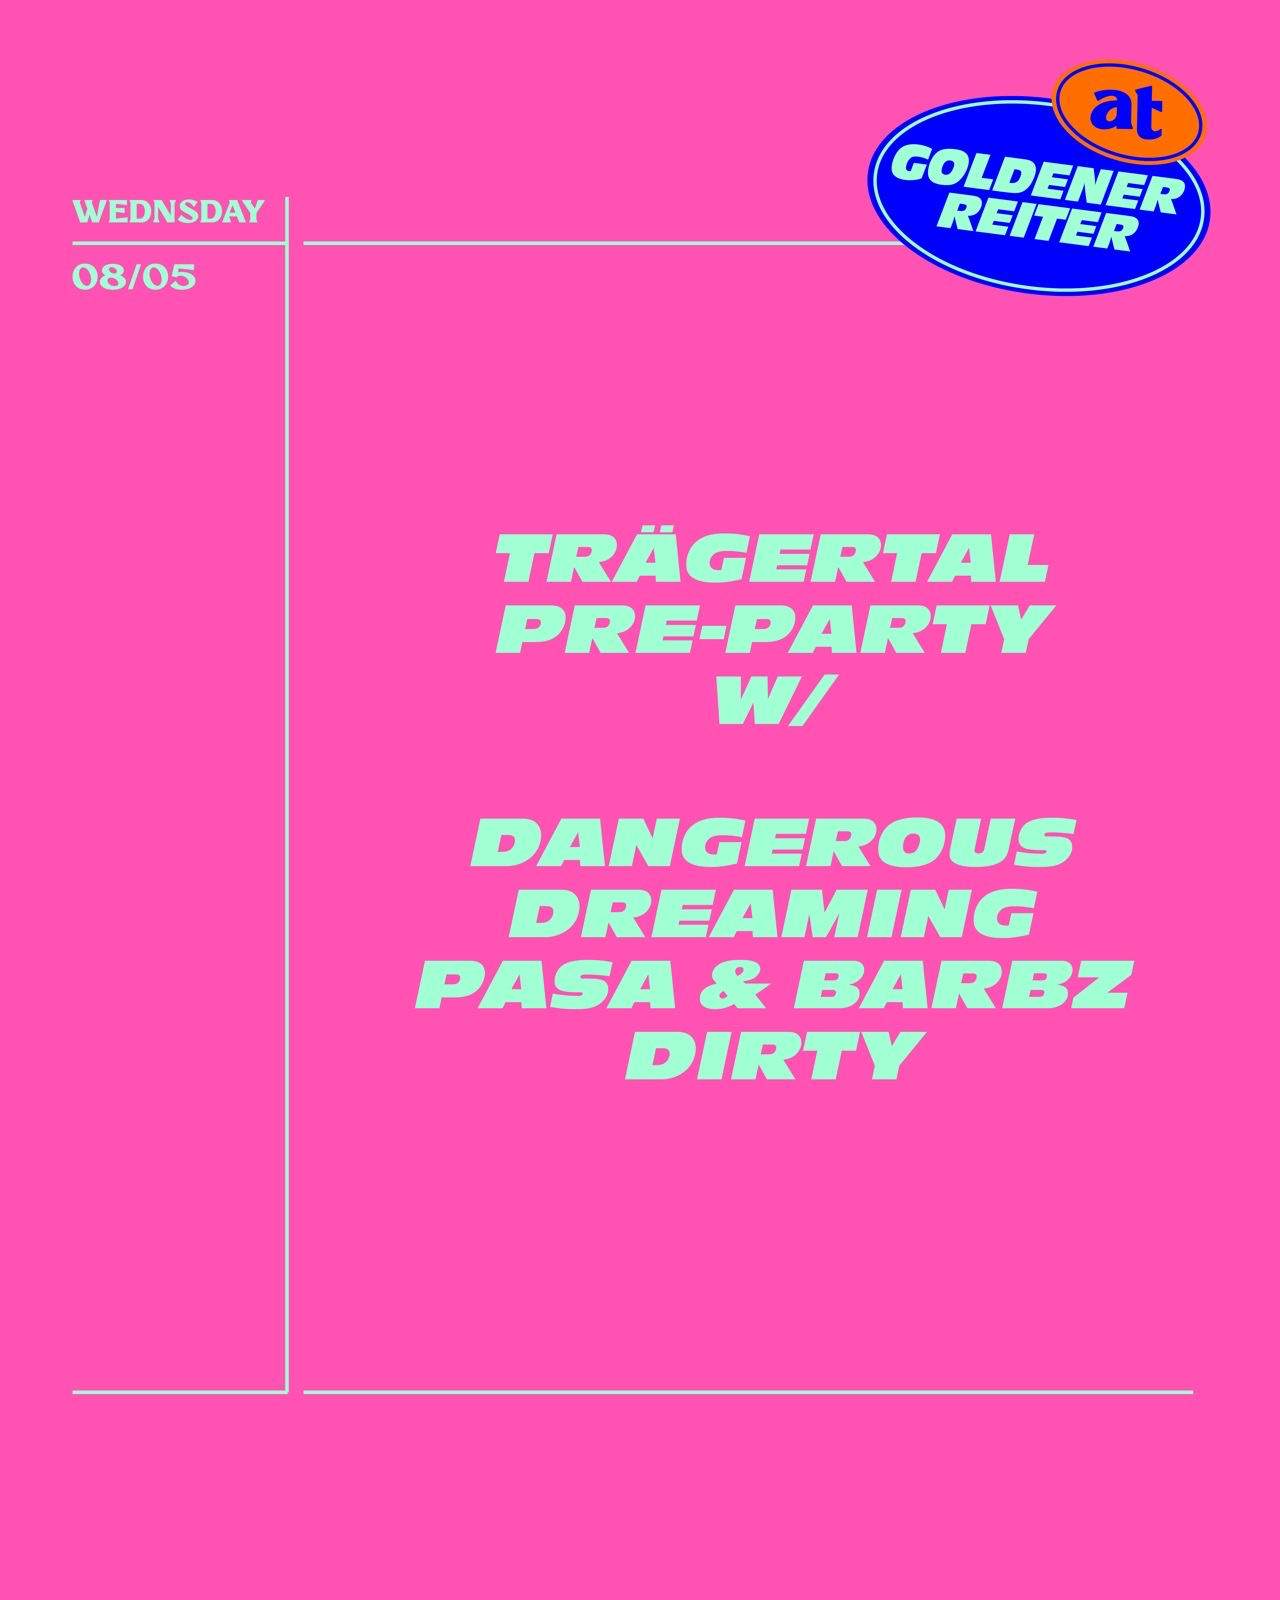 Trägertal Pre-Party with dangerous dreaming, Pasa & Barbz, Dirty - フライヤー表